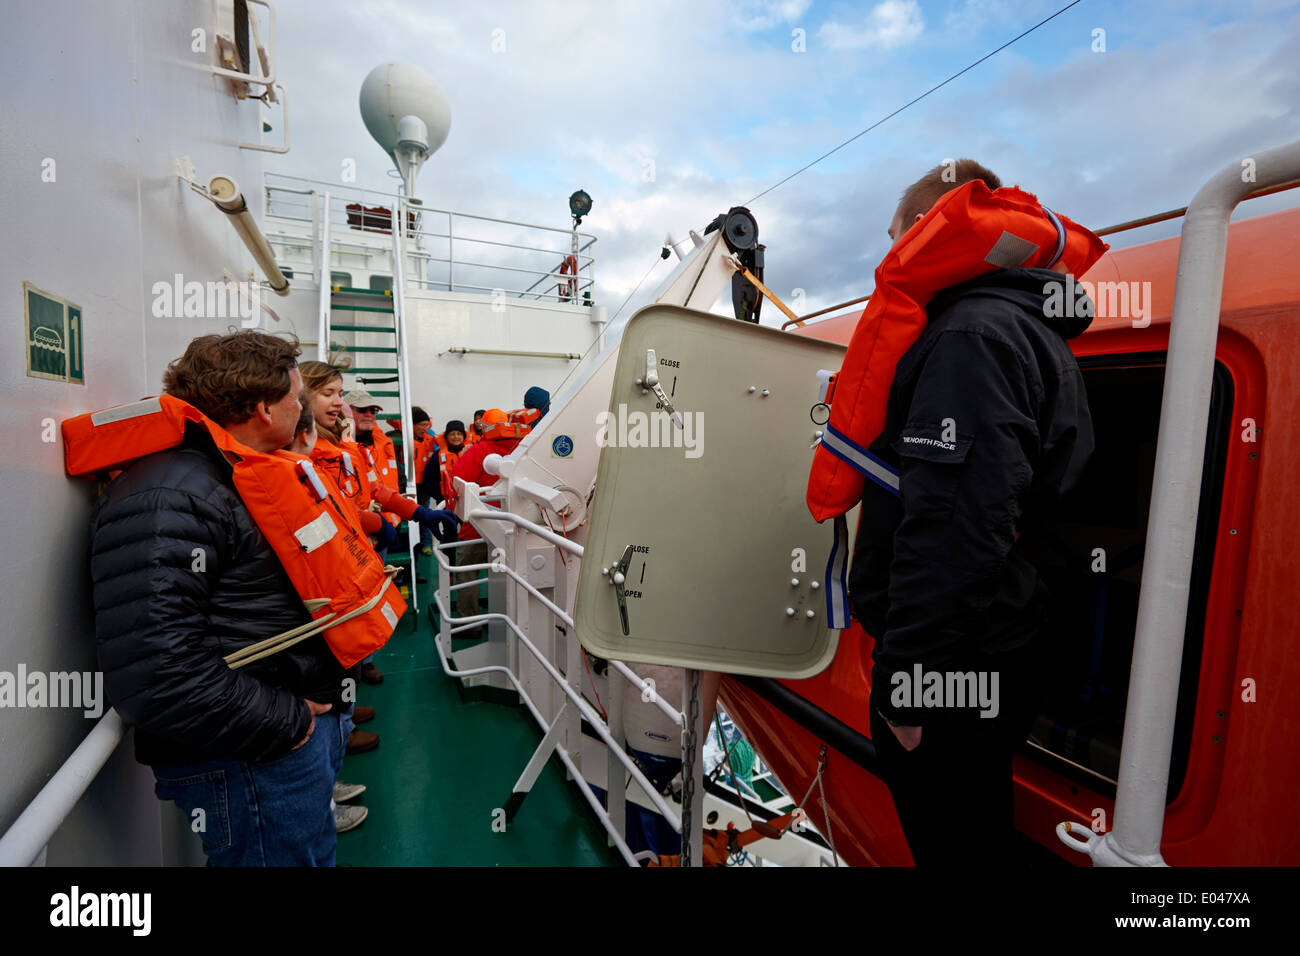 passengers taking part in a lifeboat drill on board ship Stock Photo